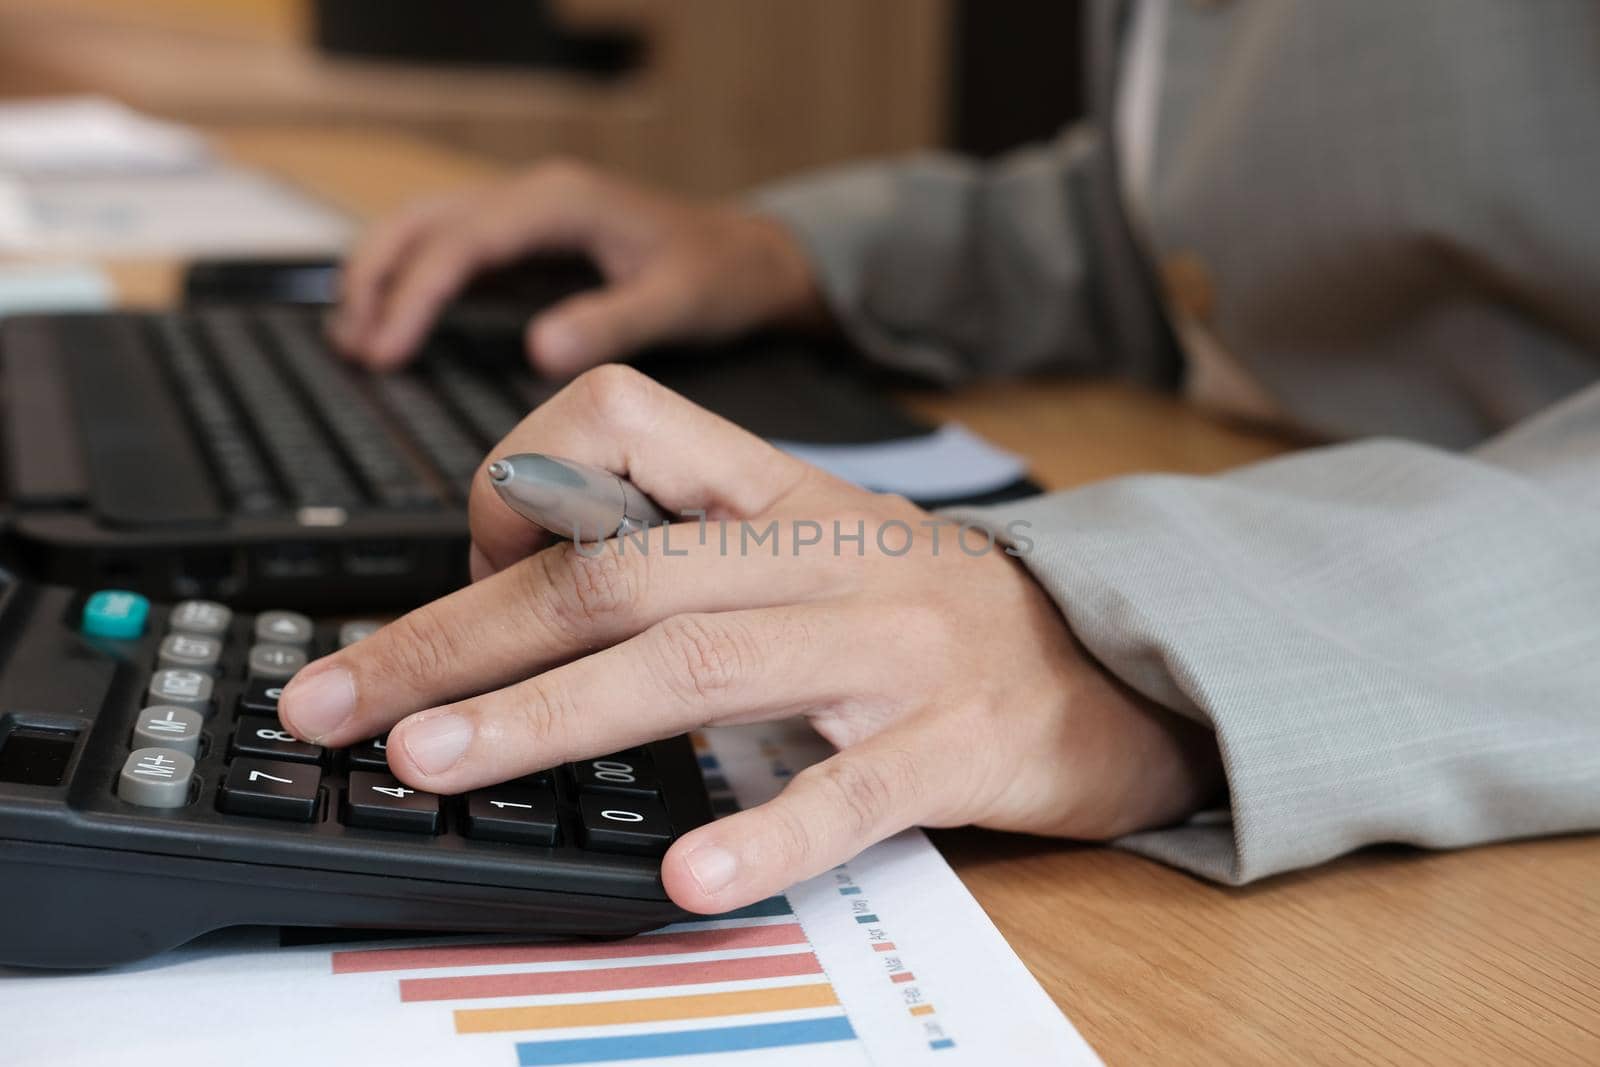 financial adviser working with calculator & computer. accountant doing accounting & calculating revenue & budget. finance & economy concept by pp99